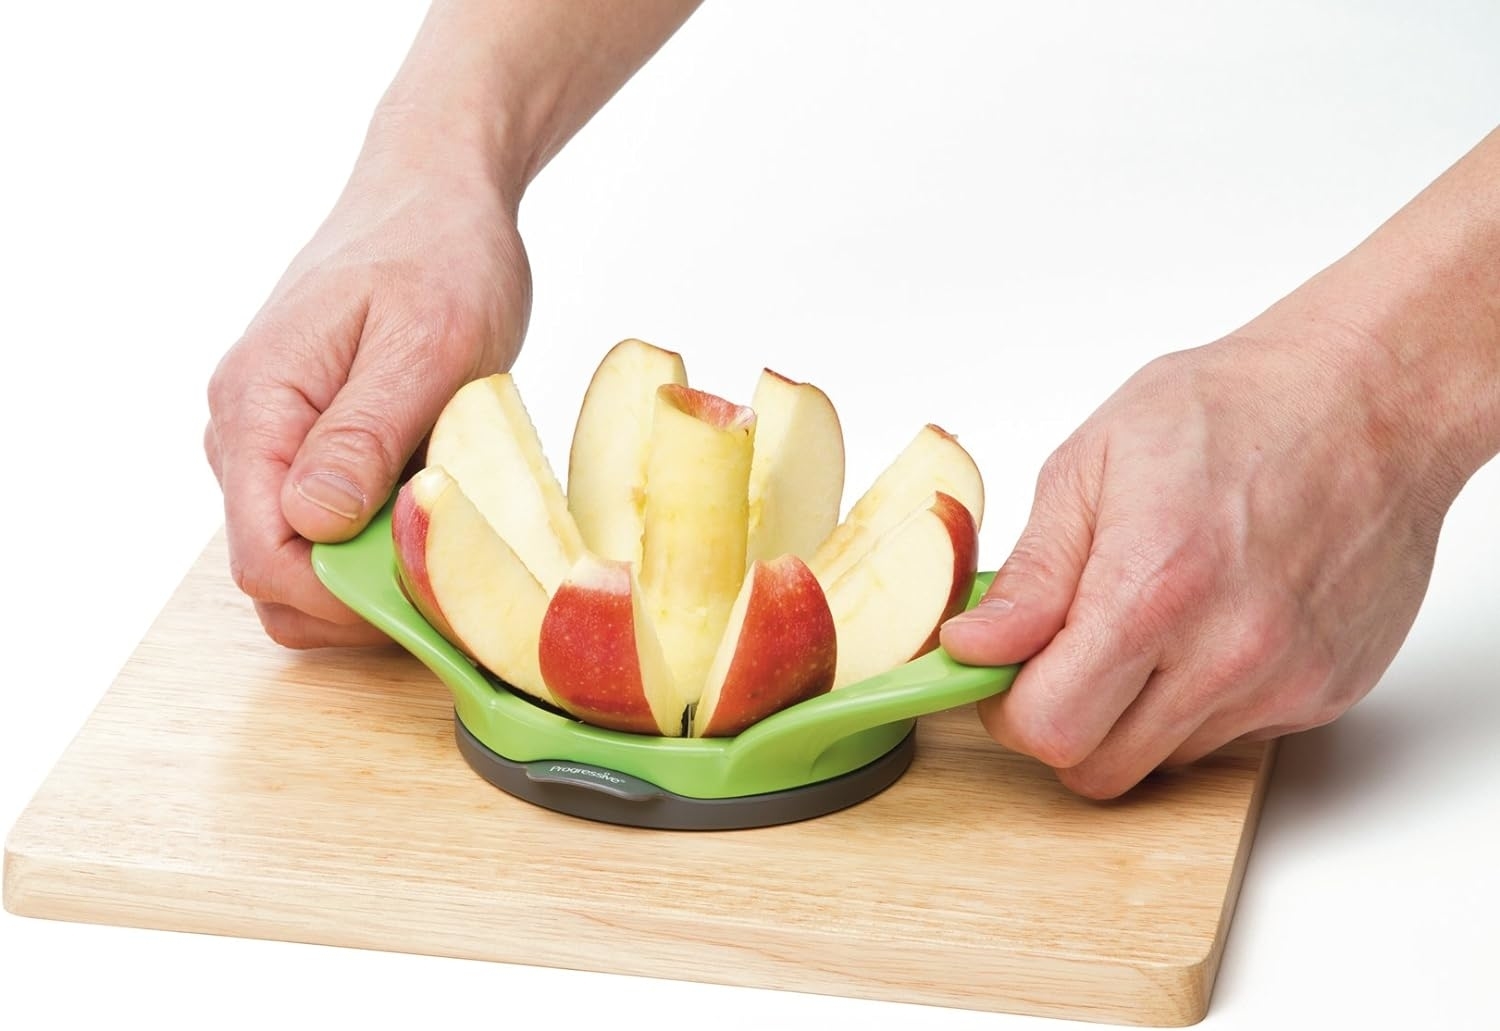 Hands using an apple slicer on a cutting board to cut an apple into wedges